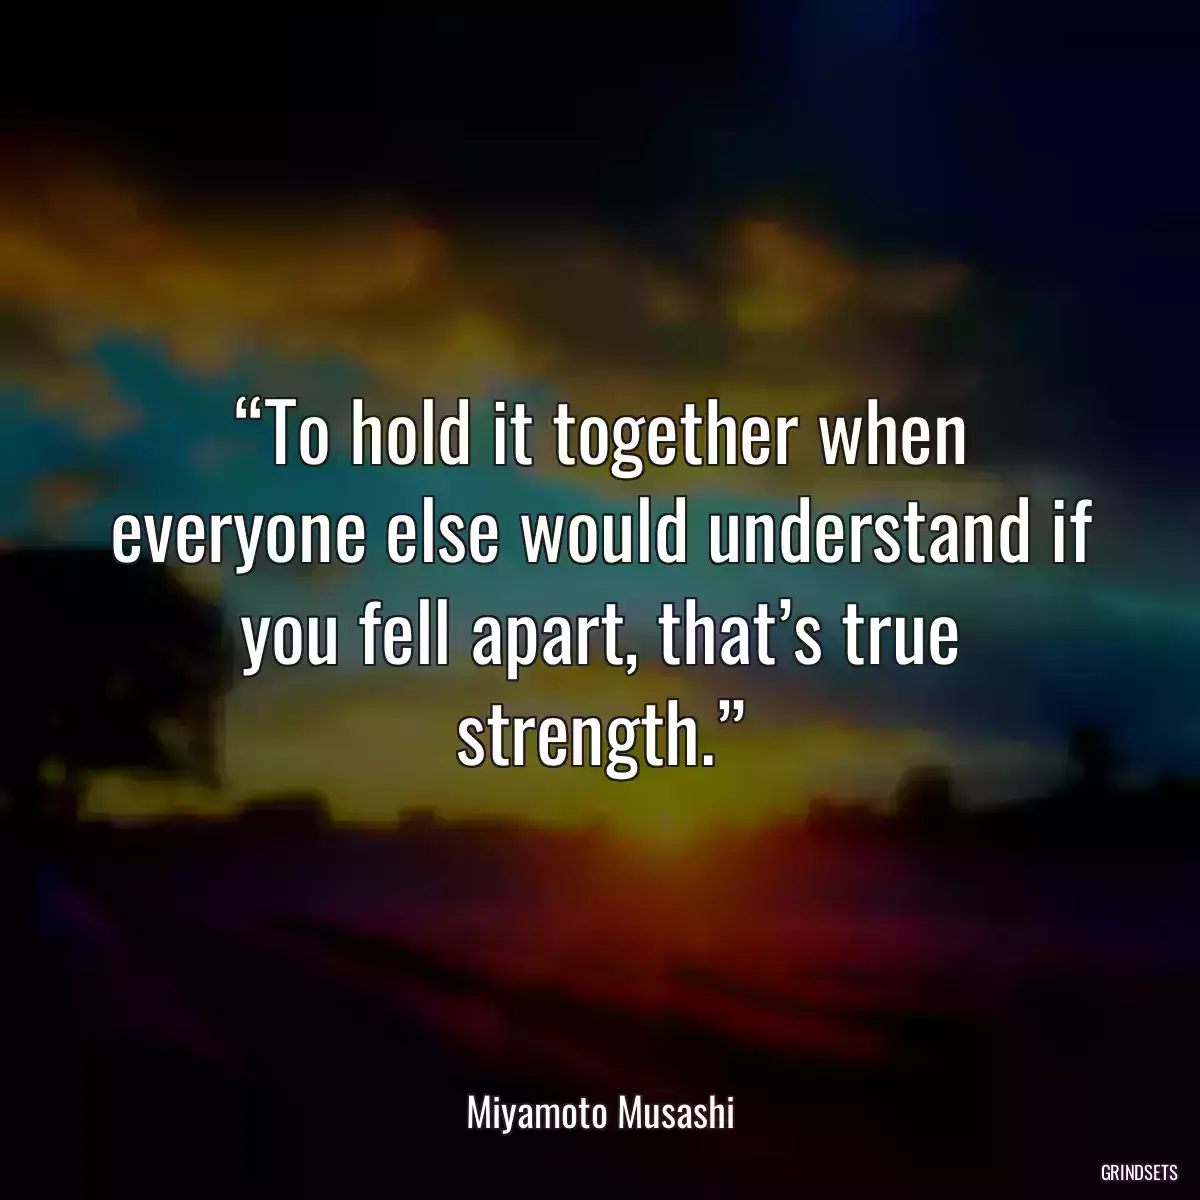 “To hold it together when everyone else would understand if you fell apart, that’s true strength.”